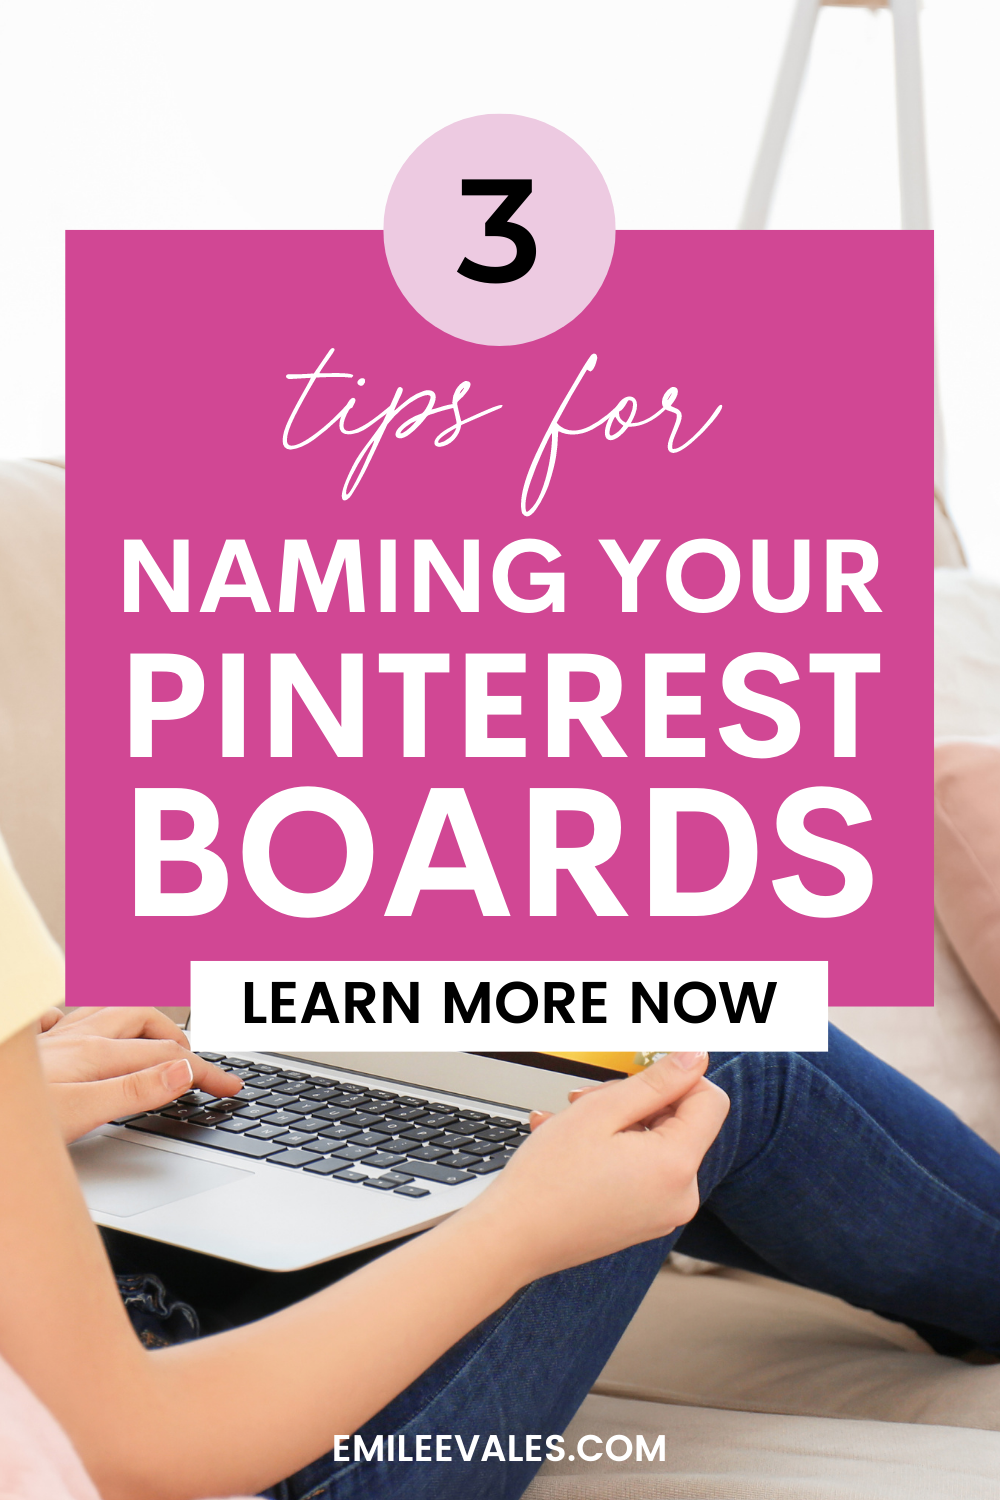 How to Name your Pinterest Boards